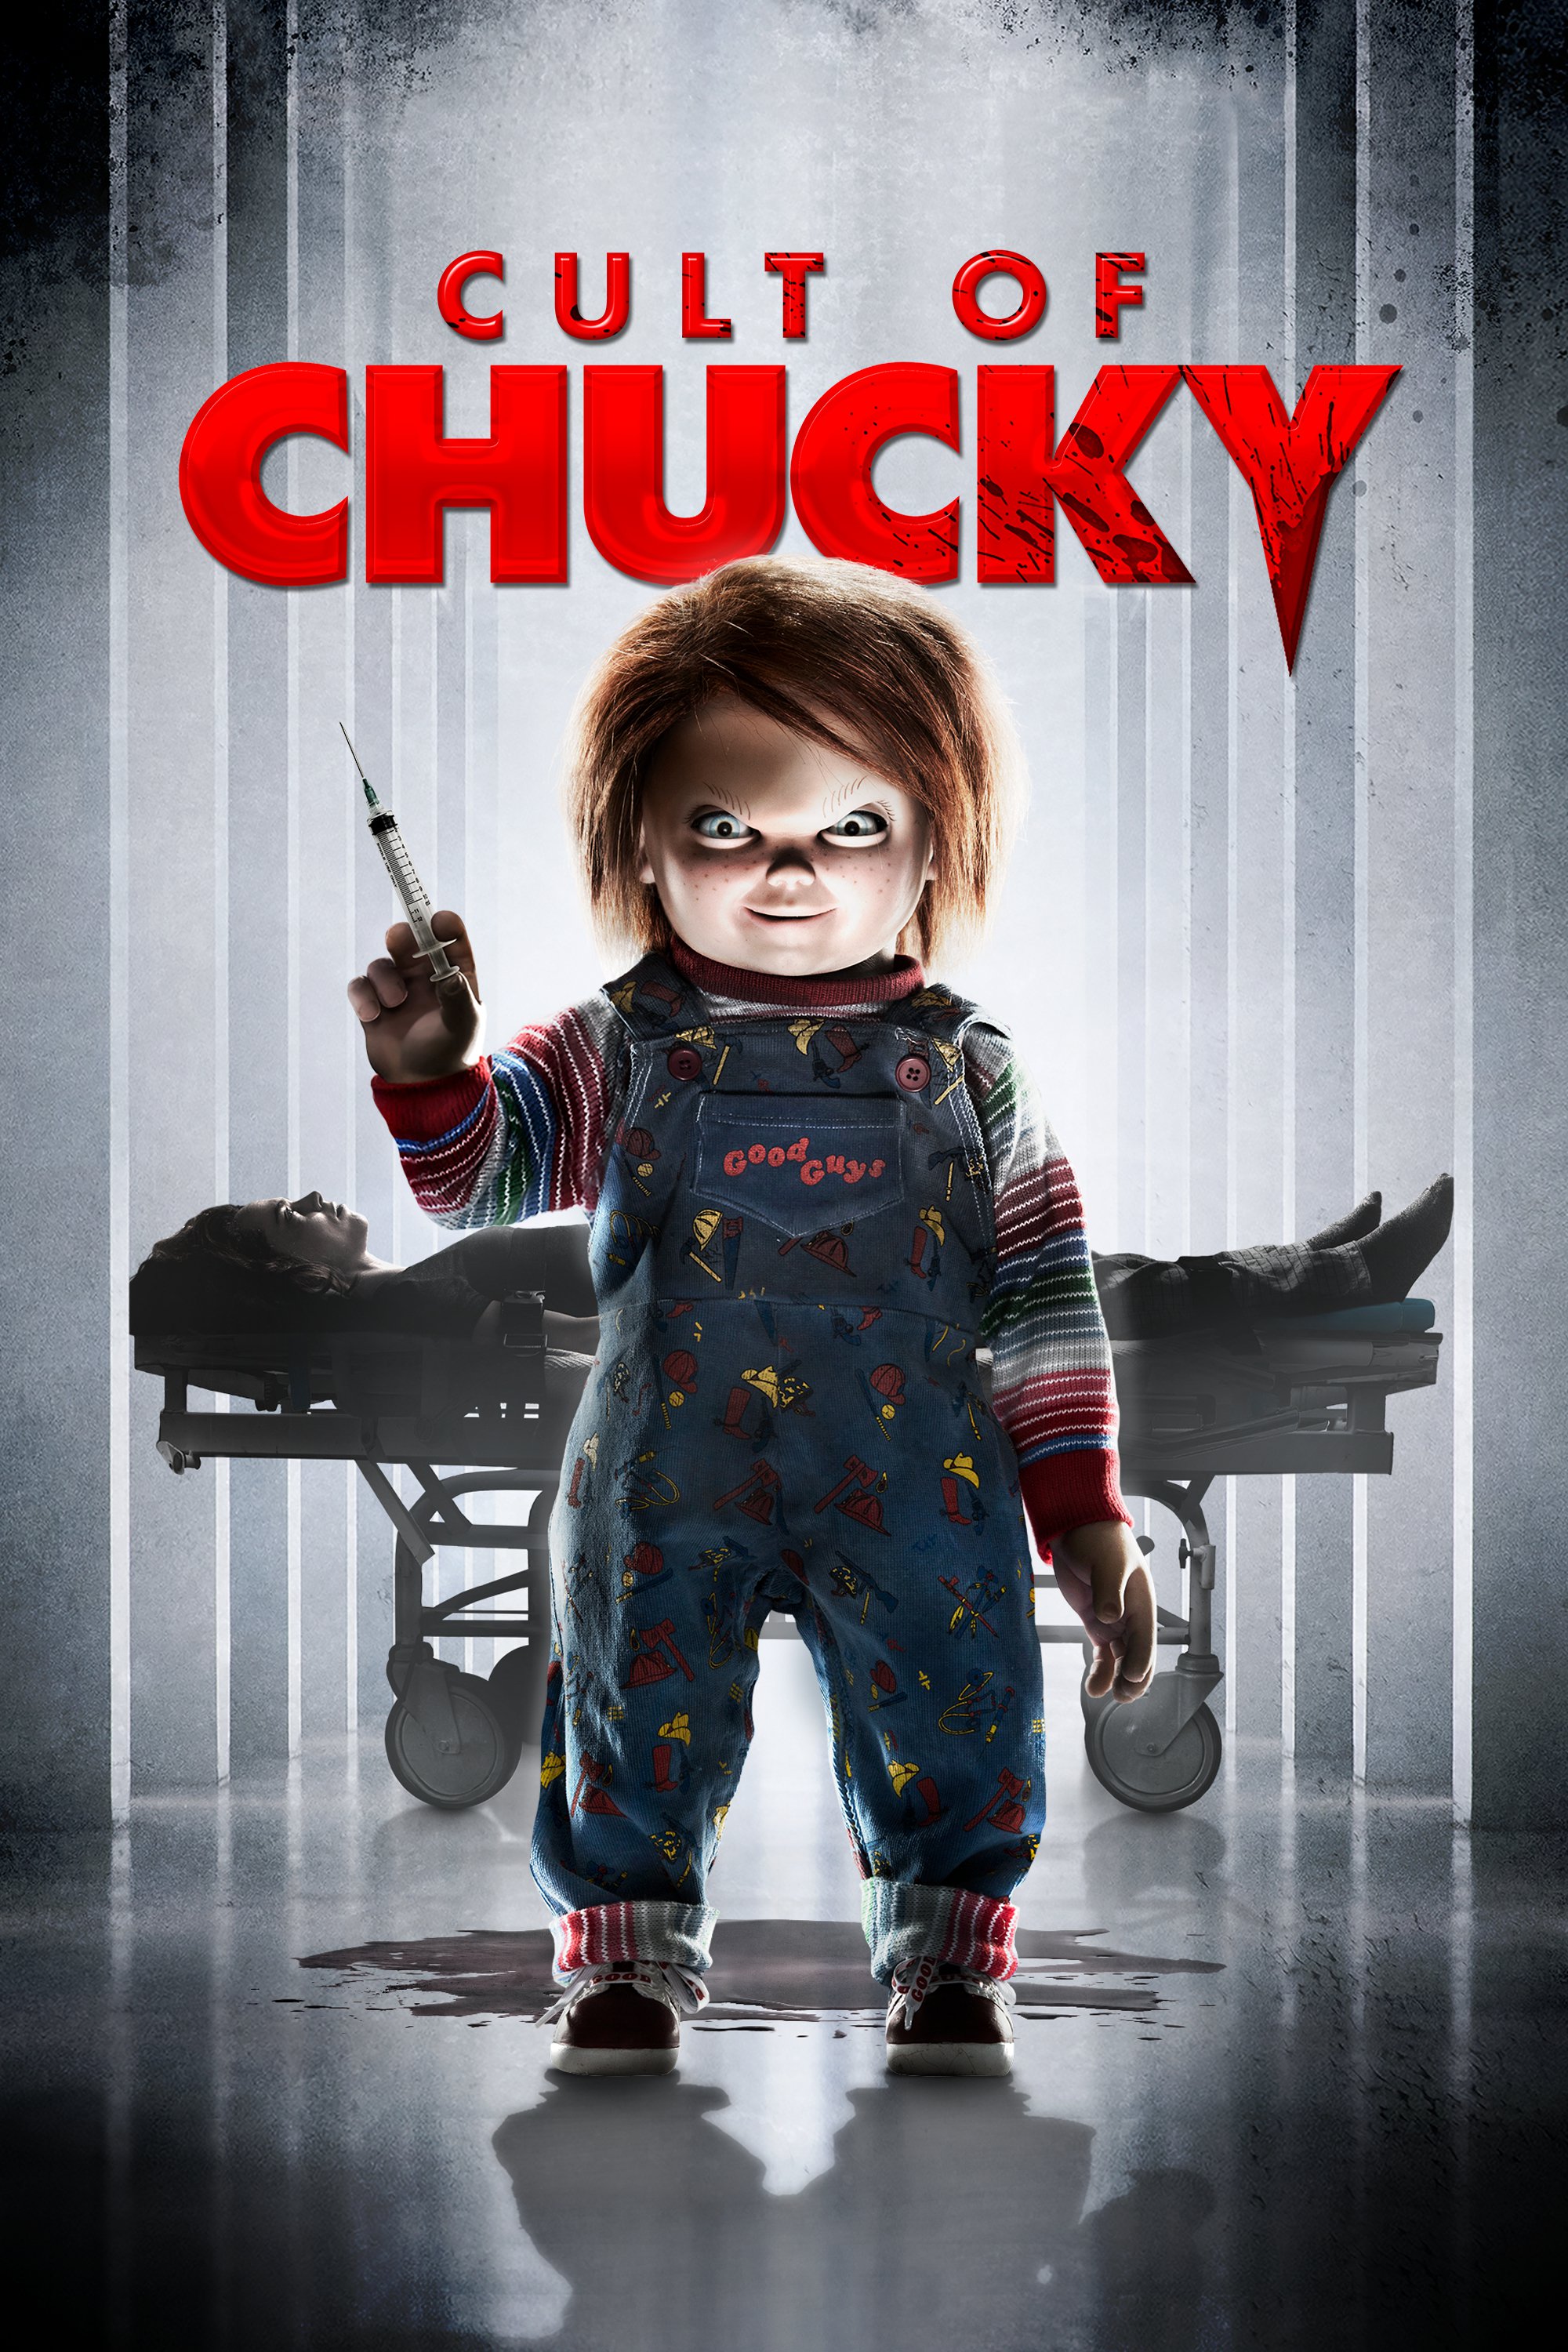 Poster for the movie "Cult of Chucky"